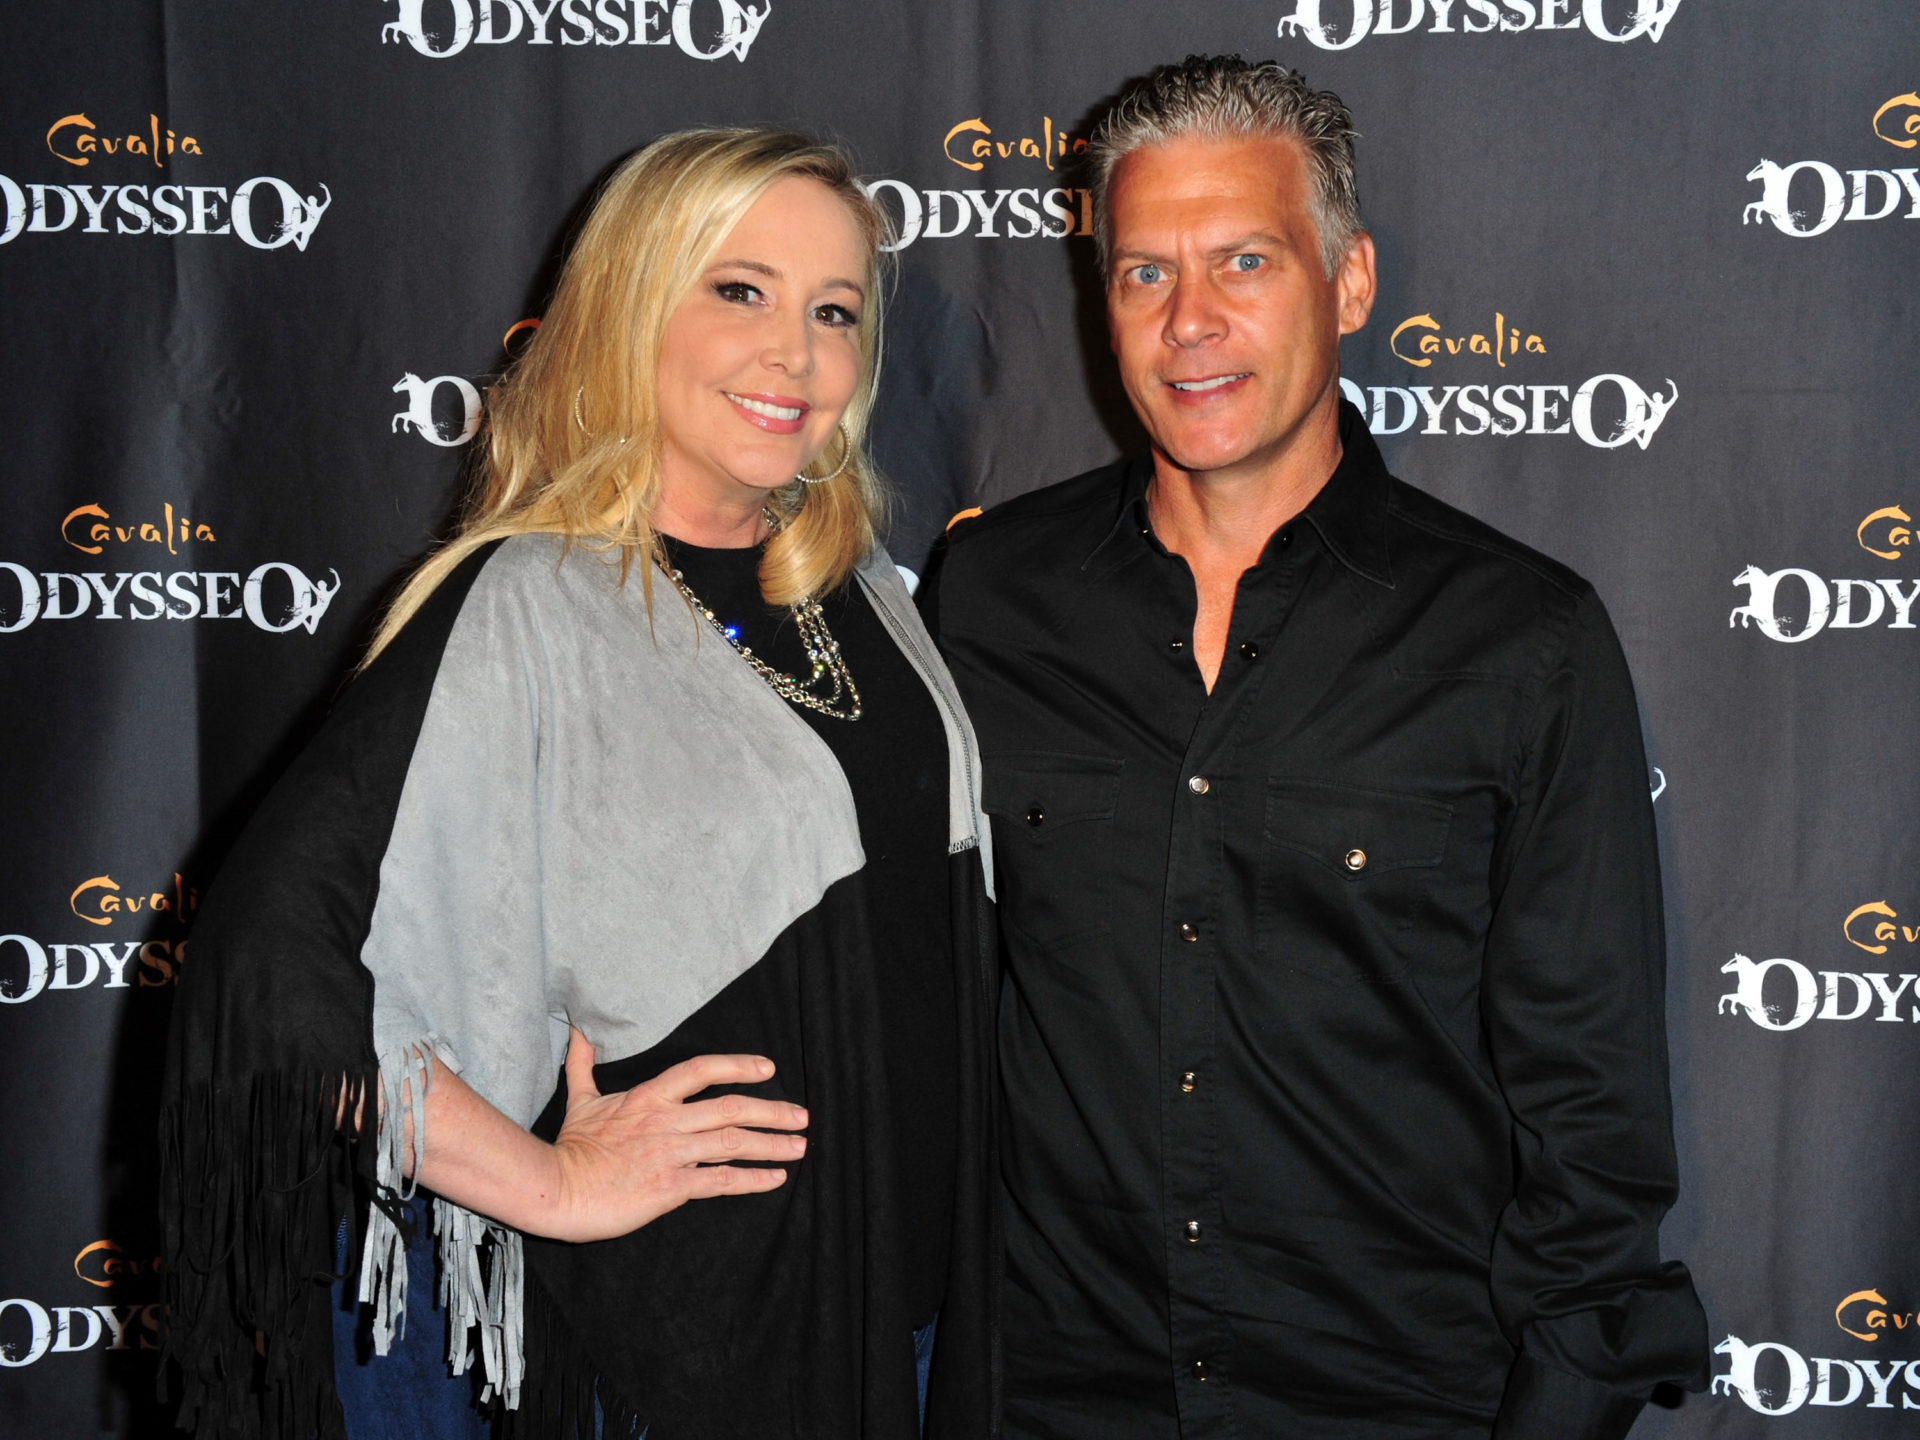 Premiere Event Of "Odysseo By Cavalia"